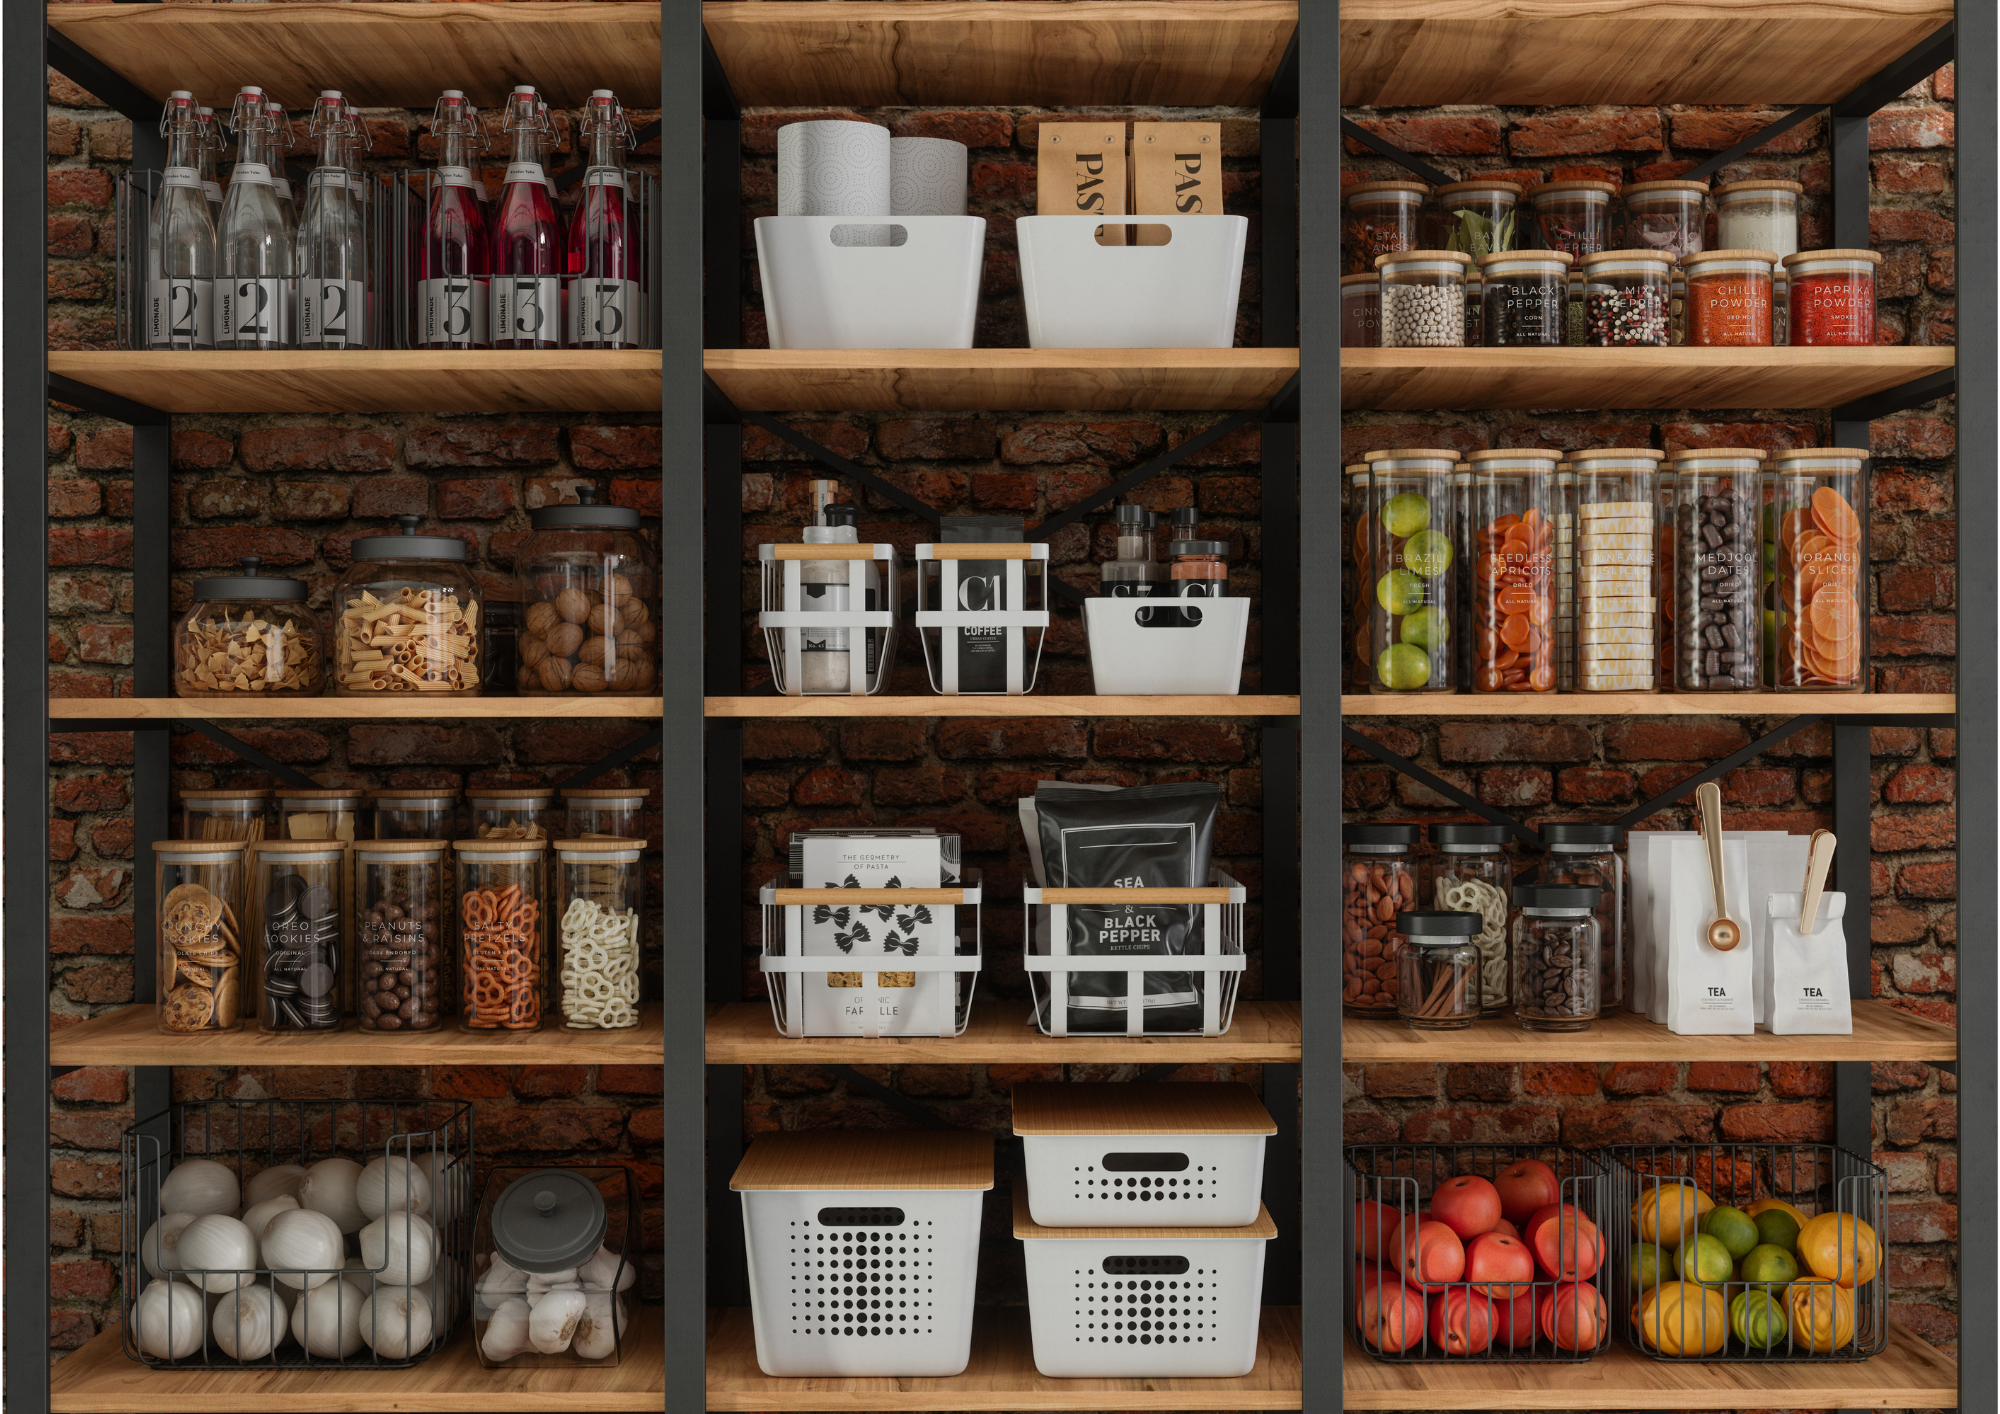 Purging your pantry to improve your health